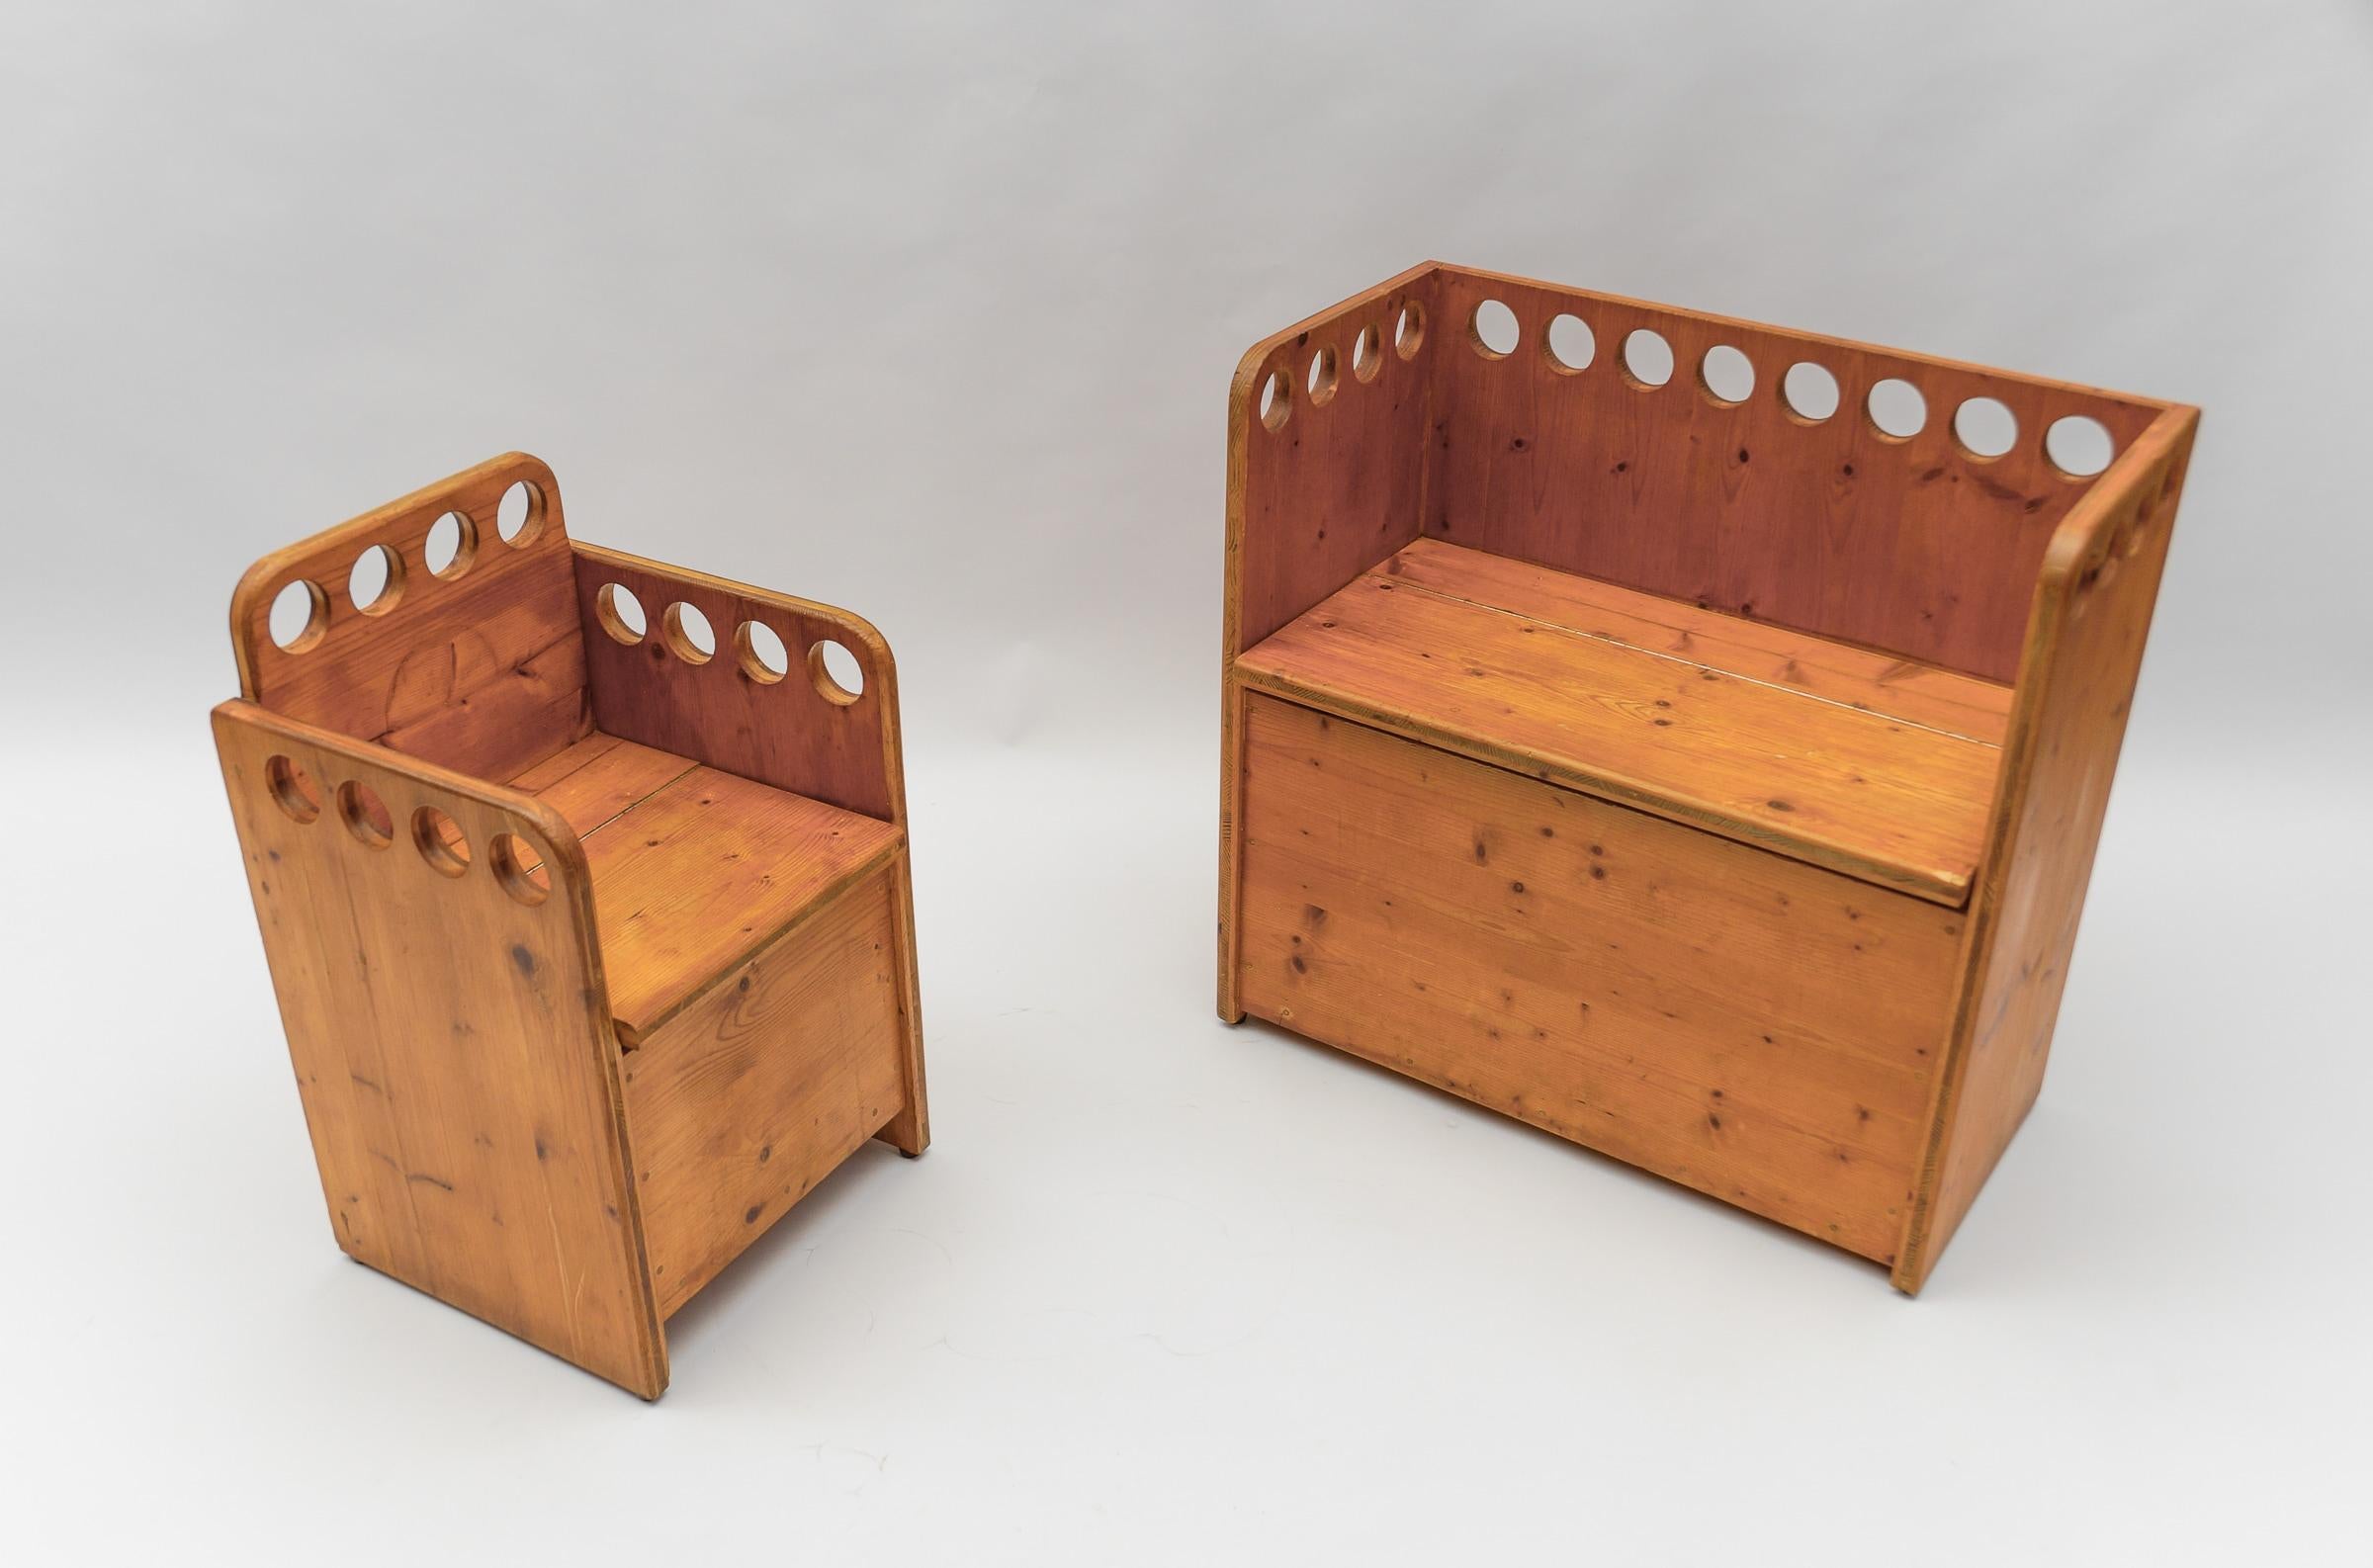 Awesome and Rare Scandinavian Pine Wood Childs Set - Chair and Bench, 1960s In Fair Condition For Sale In Nürnberg, Bayern